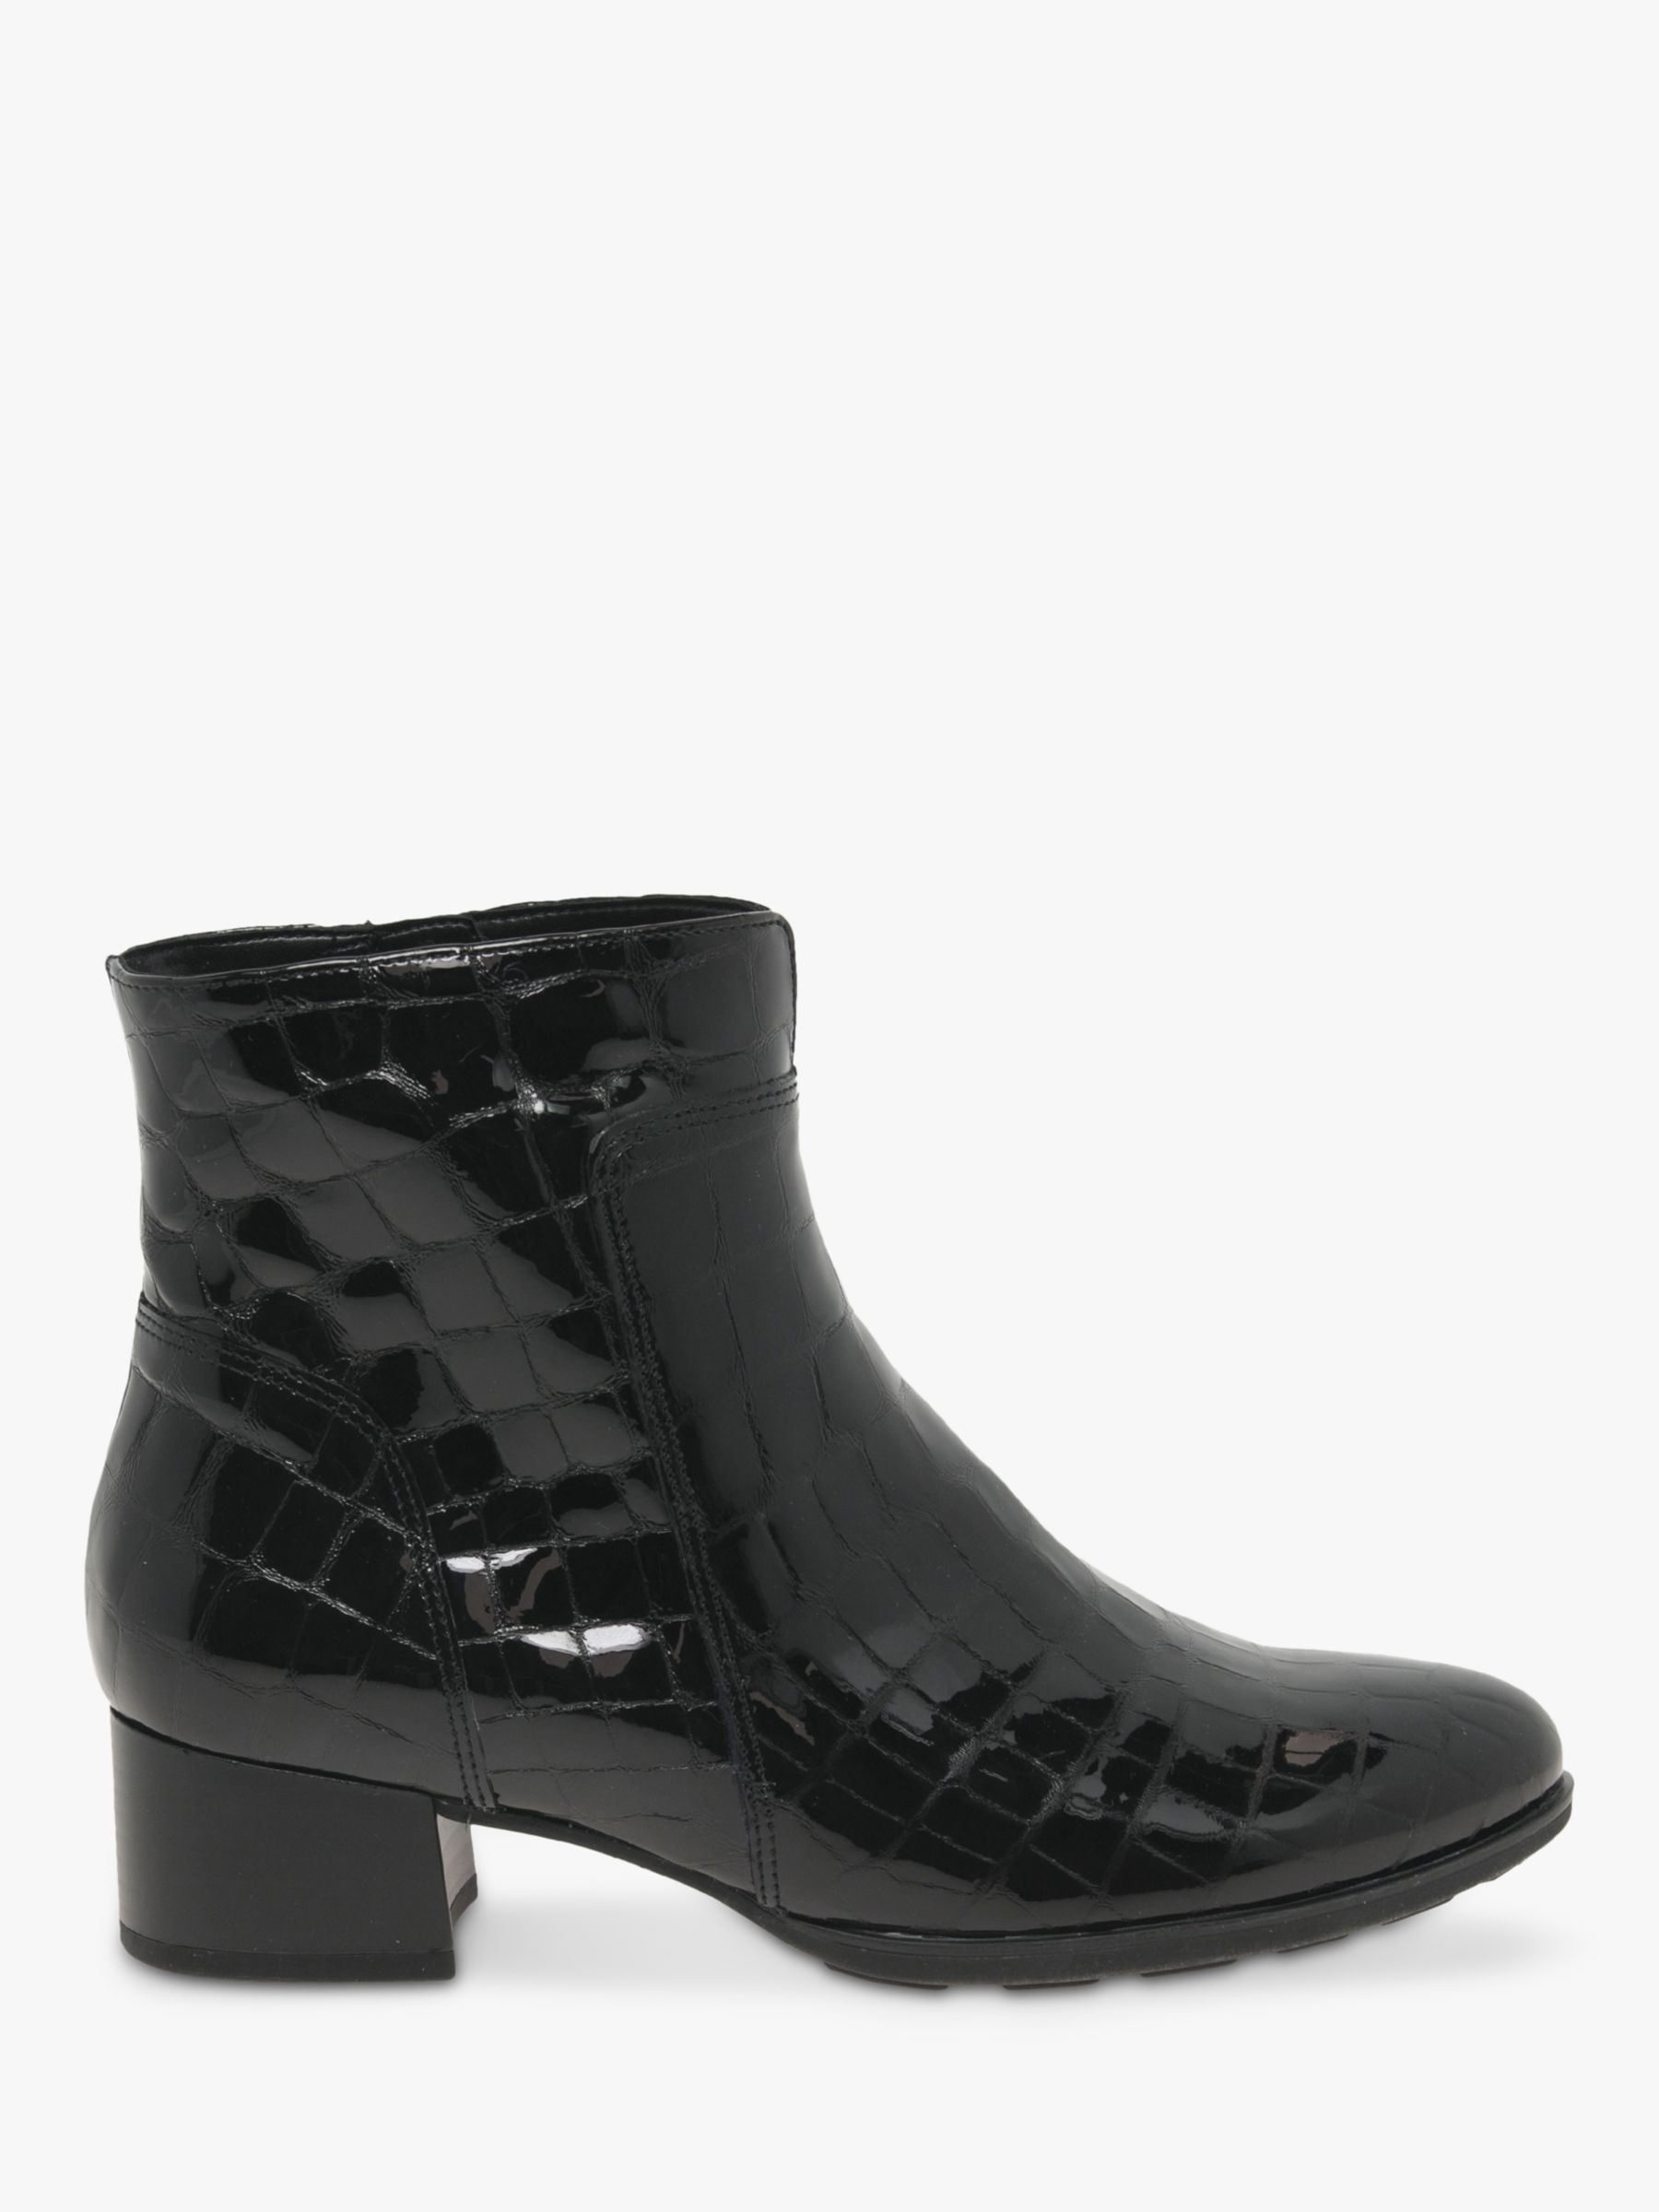 Gabor Delphino Patent Croc Leather Ankle Boots, Black at John Lewis ...